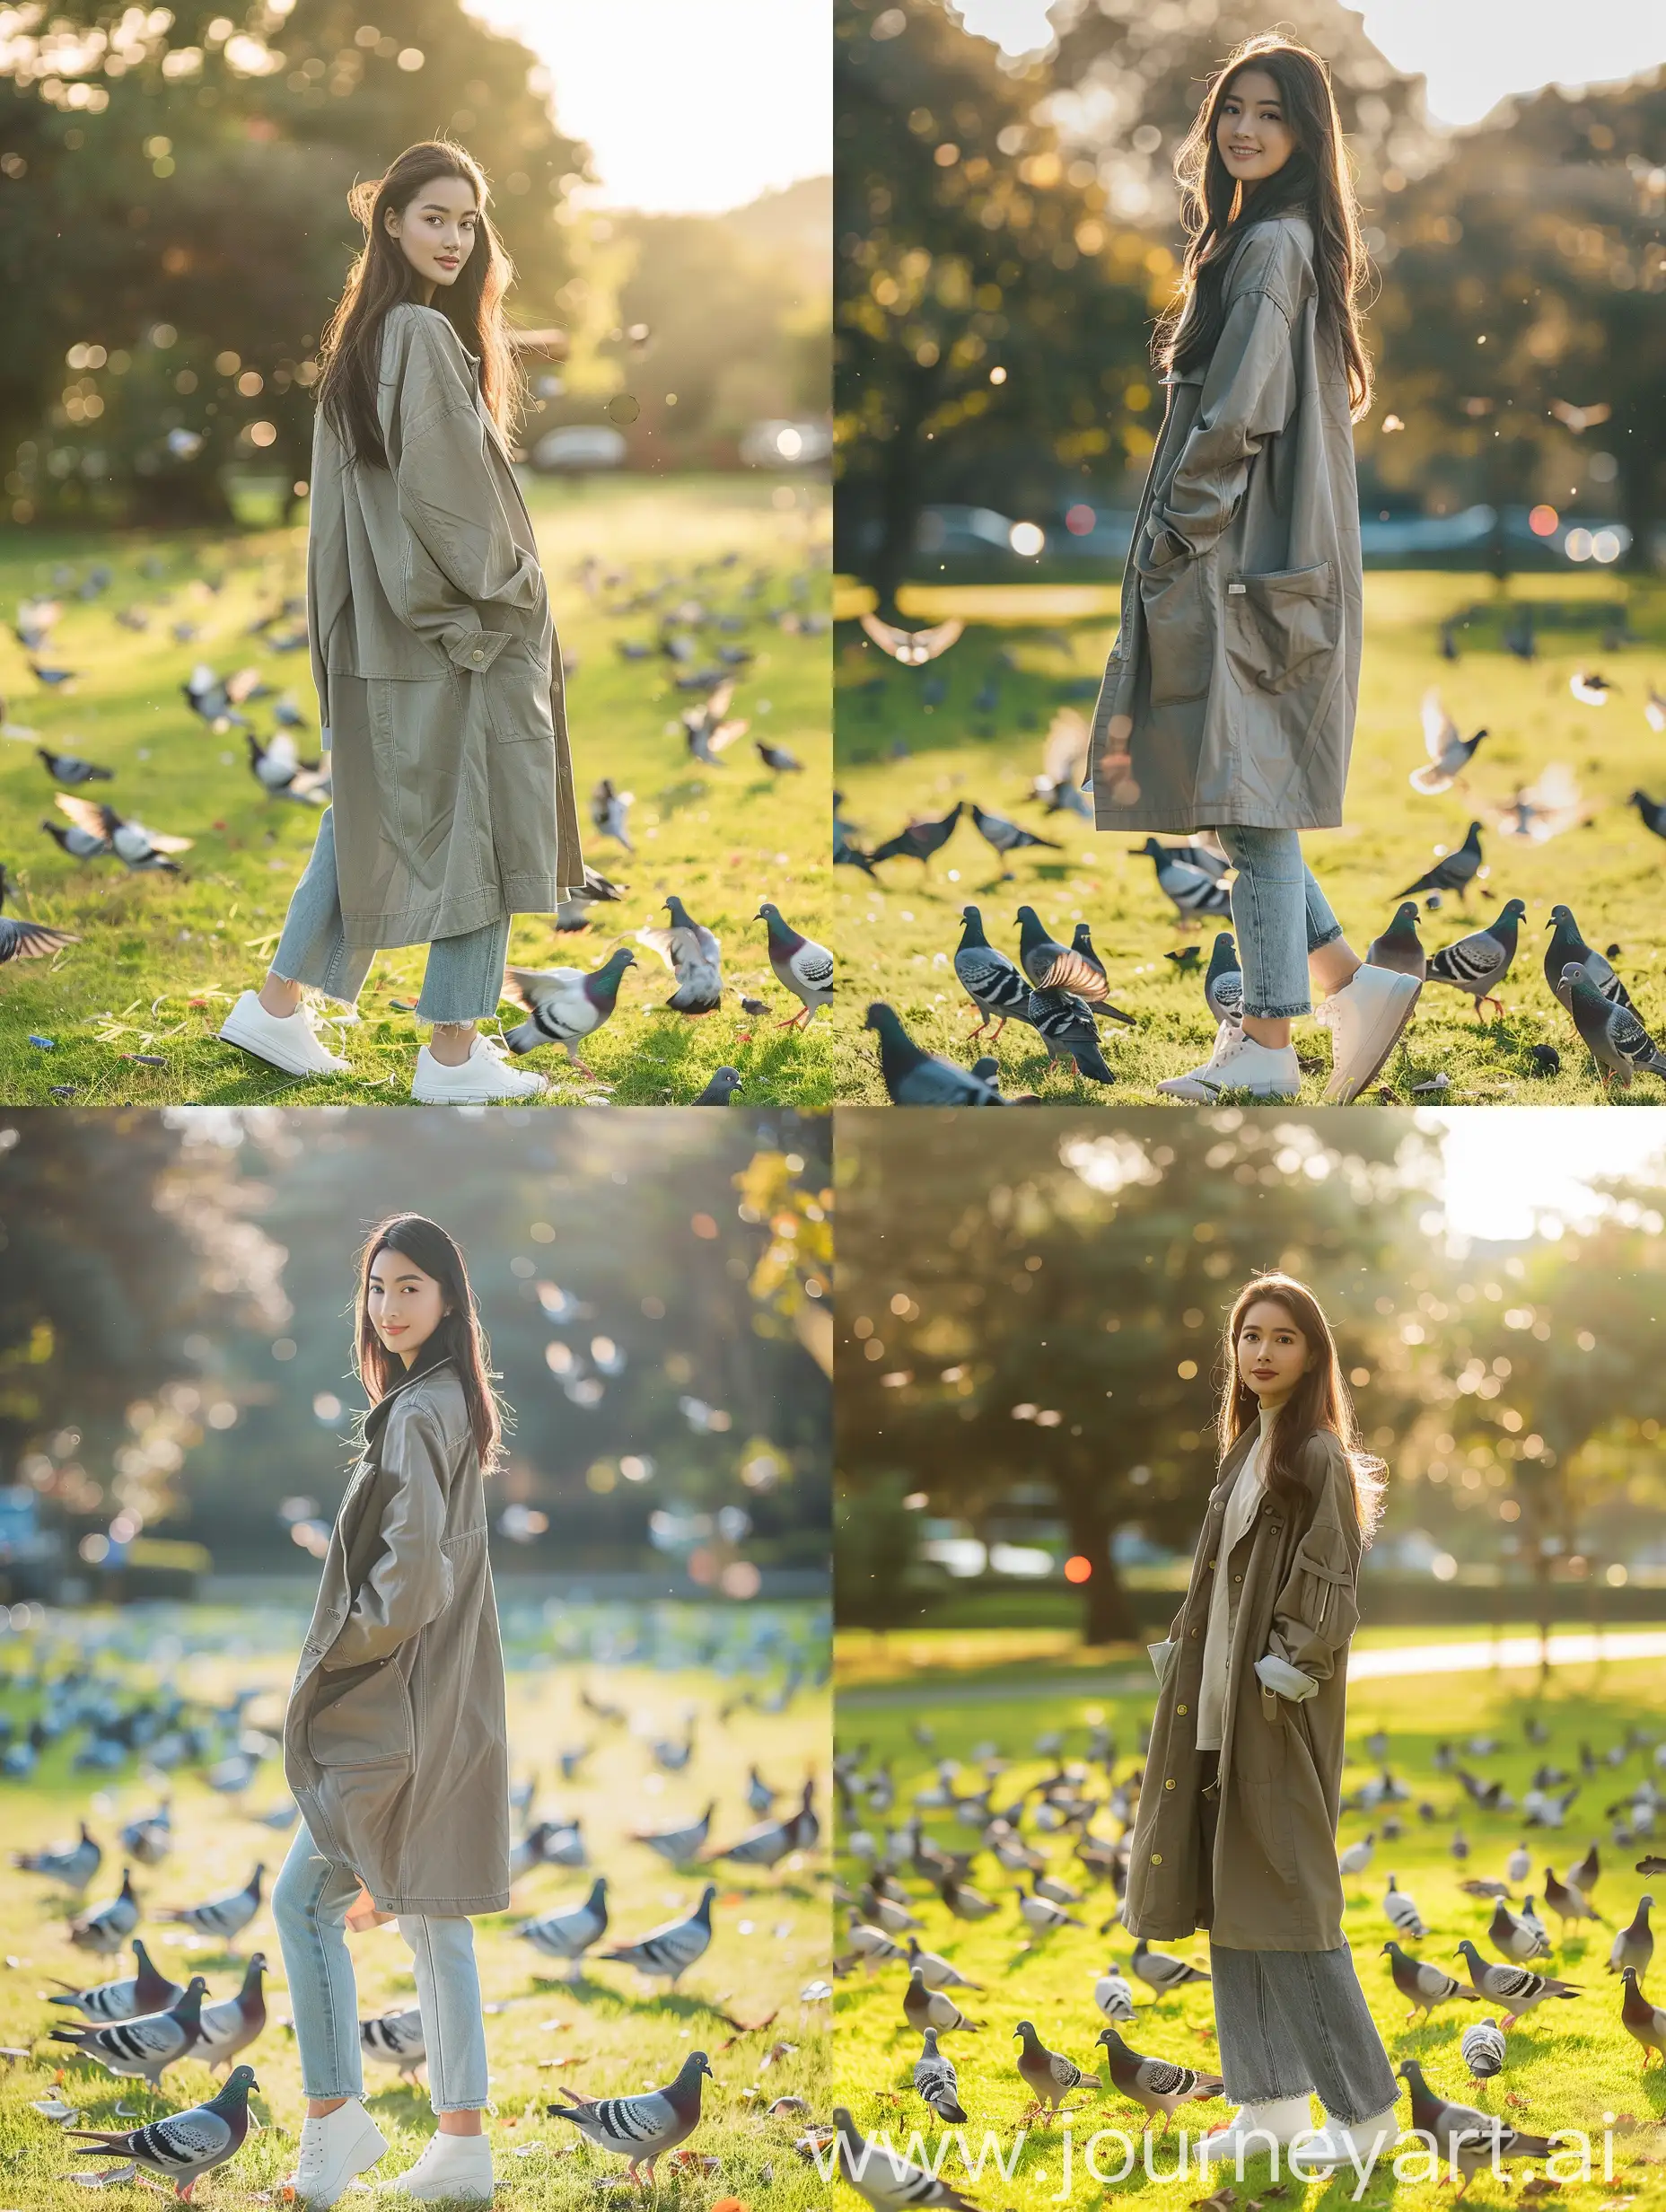 Stylish-Thai-Woman-in-Grassy-Field-Surrounded-by-Pigeons